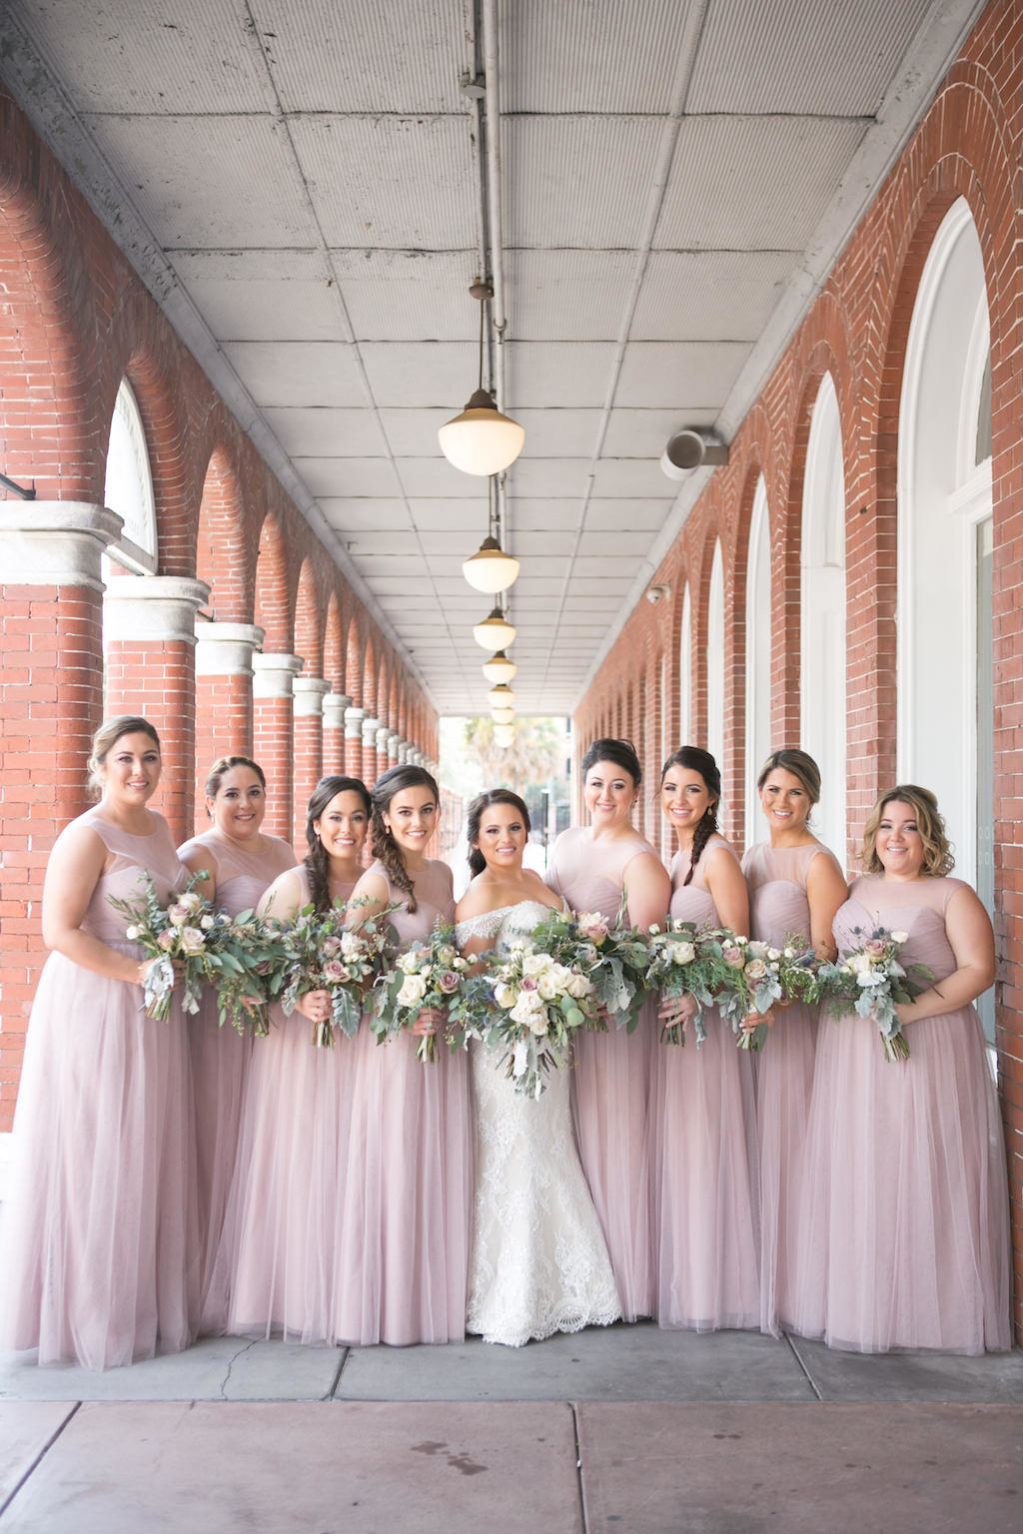 Outdoor Architectural Bridal Party Portrait, Bride in Off The Shoulder Lace Mermaid Augusta Jones Dress, Bridesmaids in Matching Strapless Layered Mauve Pink Jenny Yoo Dresses, with Blush Rose and Floral and Greenery Bouquet | Tampa Bay Wedding Photographer Carrie Wildes Photography | Dress Shop Bella Bridesmaids